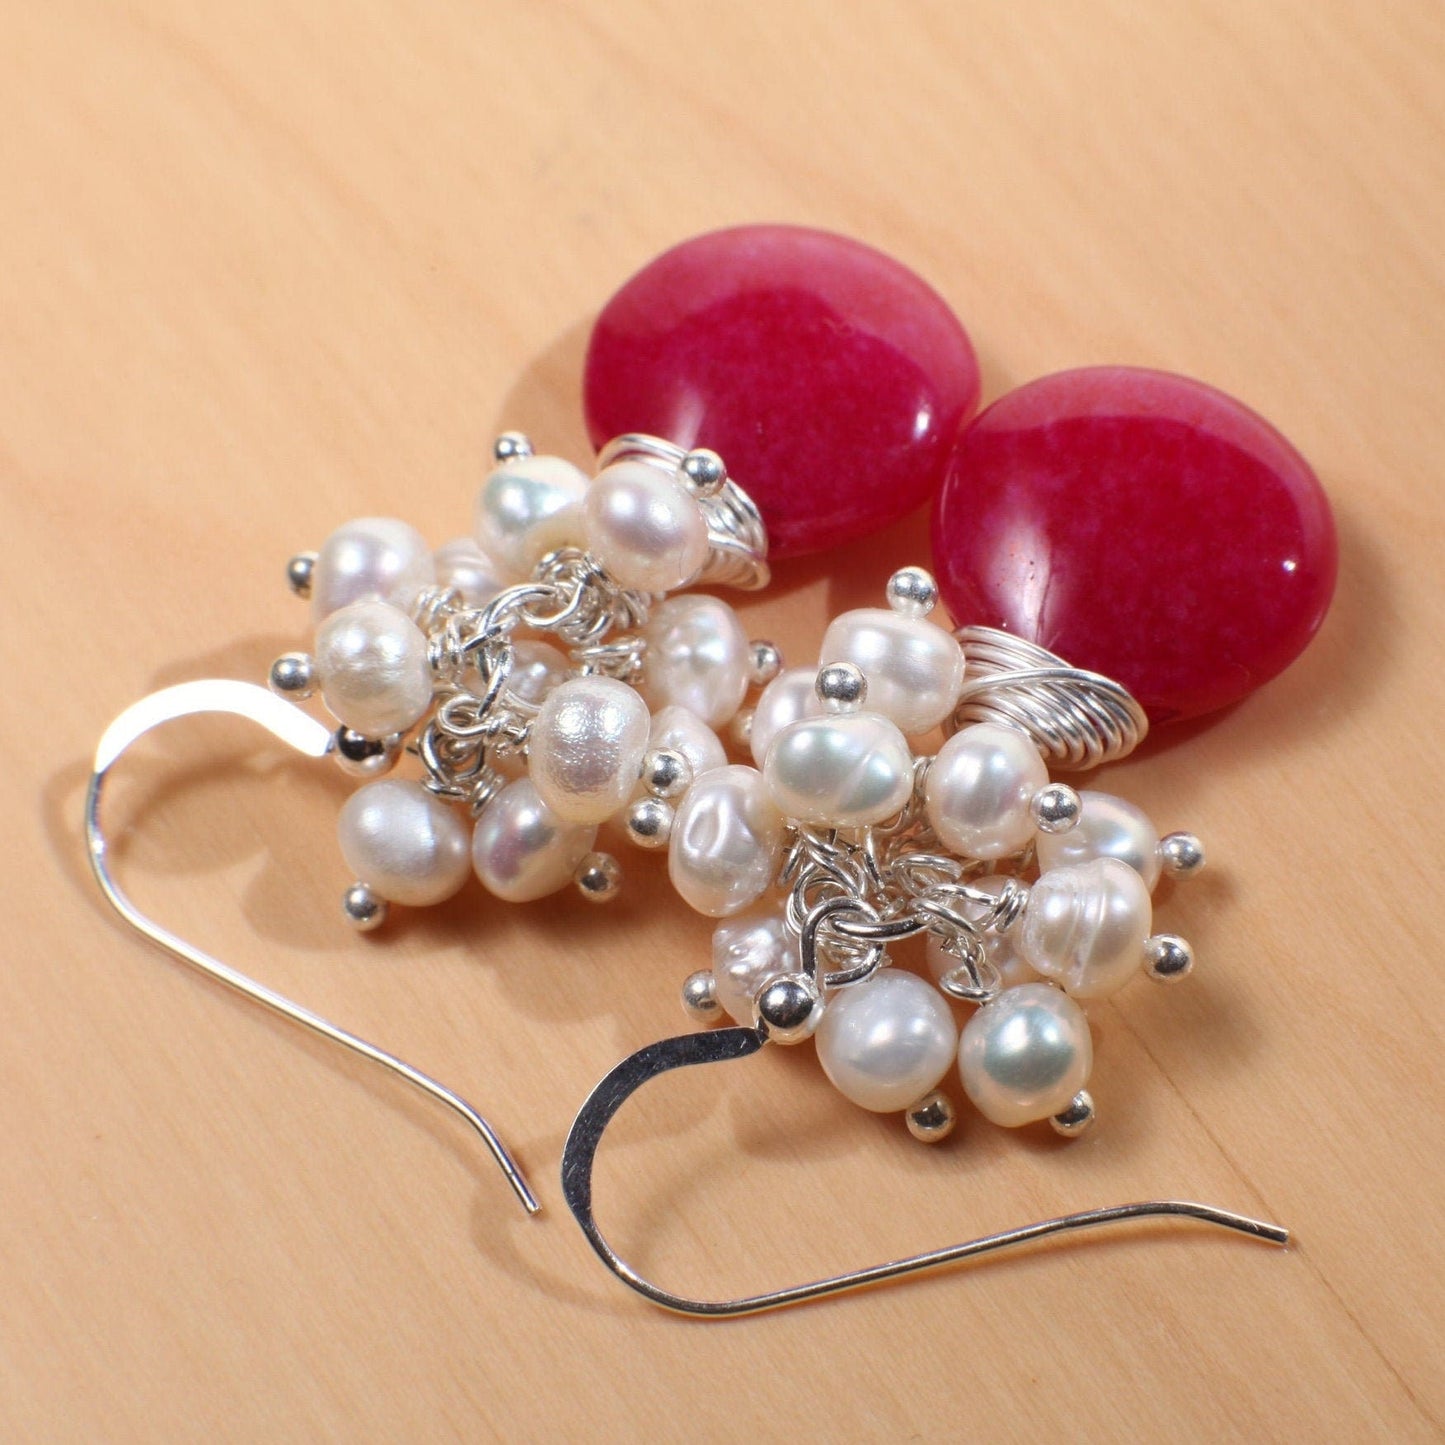 Freshwater Pearl Cluster with Hot Pink Fuchsia Quartz Teardrop Wire Wrapped Dangling Earrings in 925 Sterling Silver Earwire, Handmade Gift